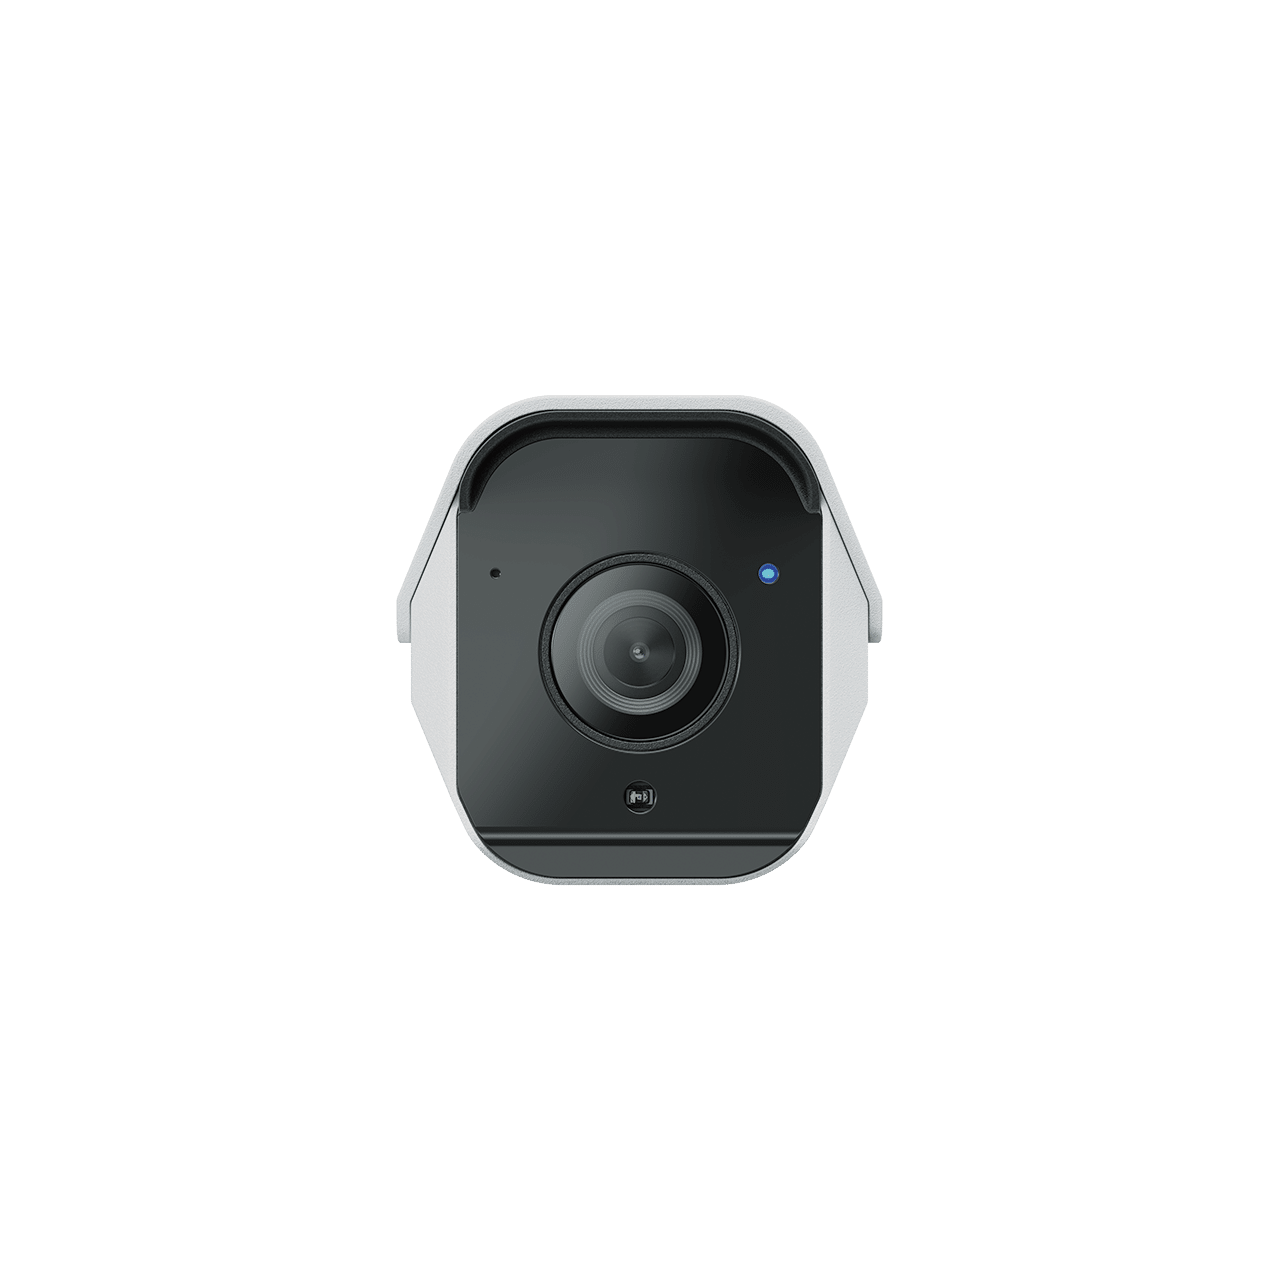 Synology introduces its first AI video surveillance cameras